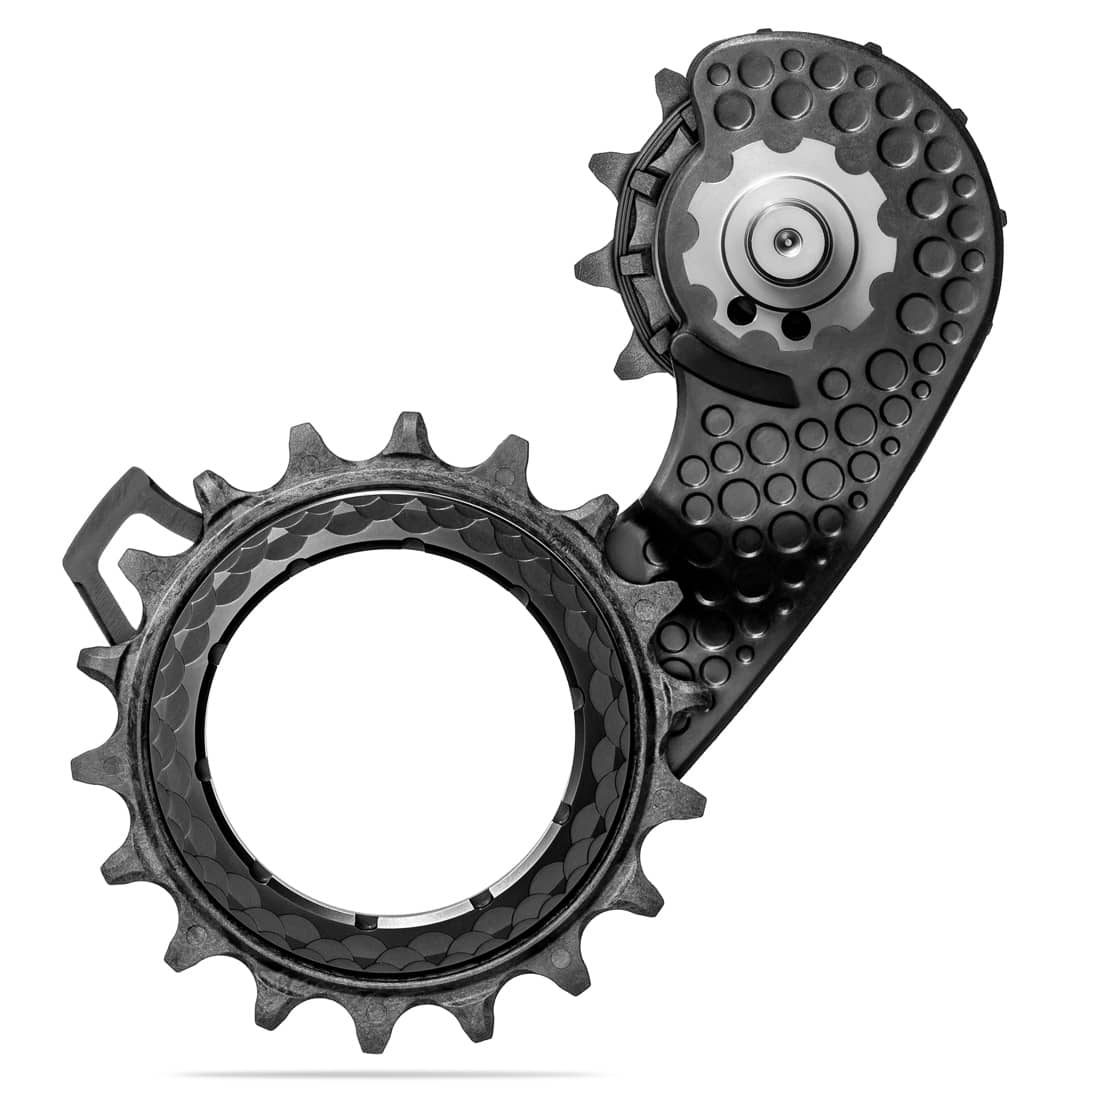 Hollowcage carbon ceramic OSPW cage for Shimano 9200